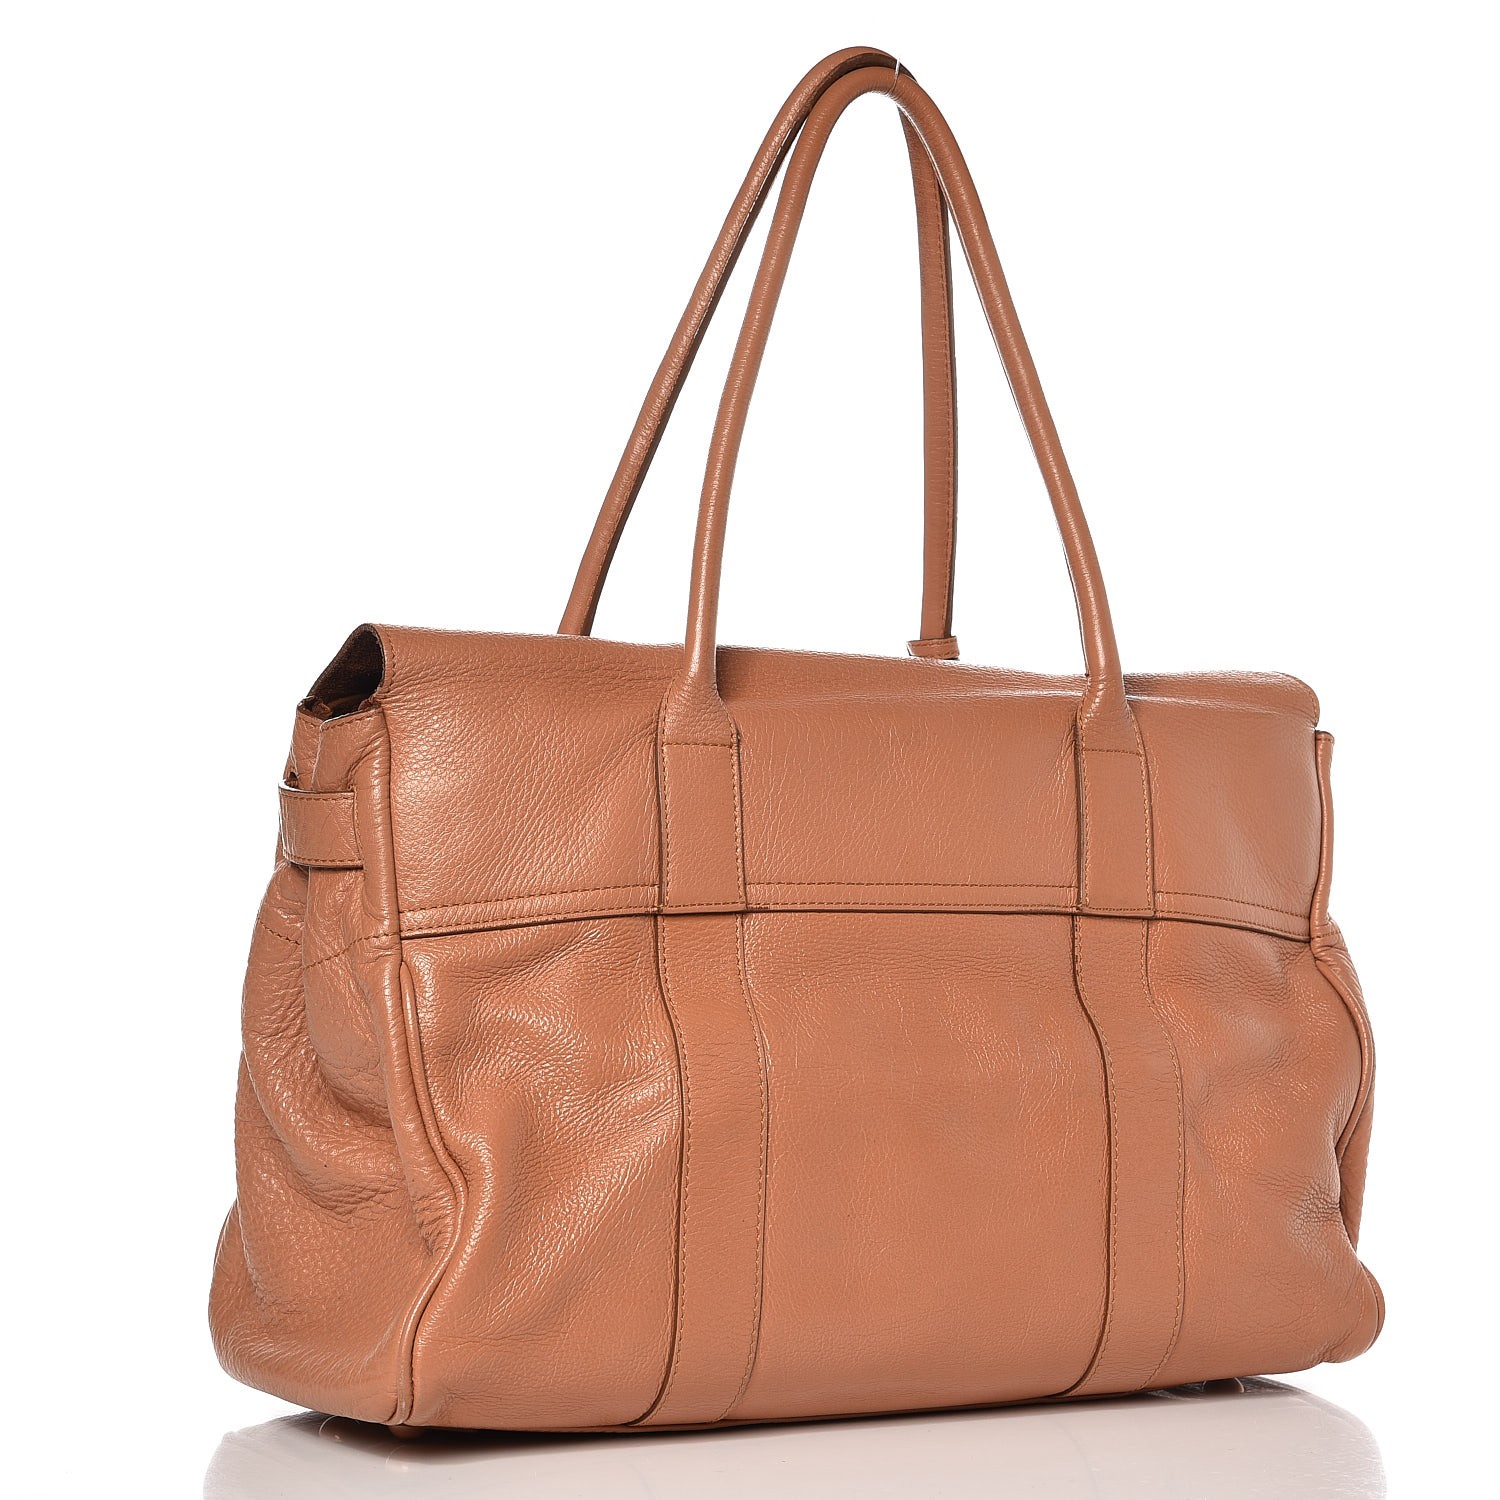 MULBERRY Soft Spongy Bayswater Chestnut 267700 | FASHIONPHILE